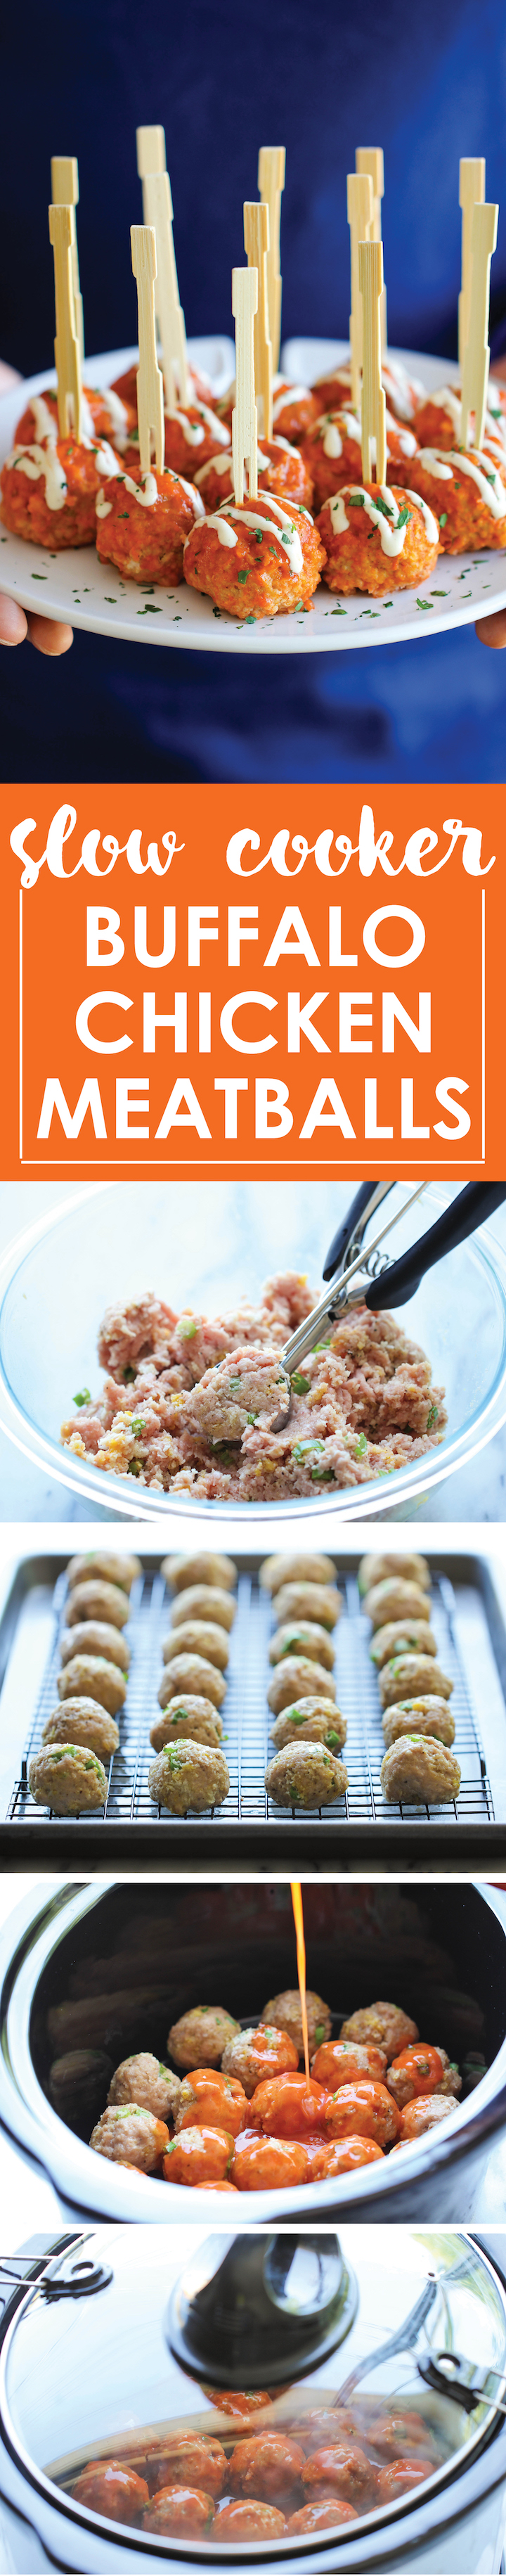 Slow Cooker Buffalo Chicken Meatballs - A lighter, healthier alternative to buffalo wings that you can make right in the slow cooker!